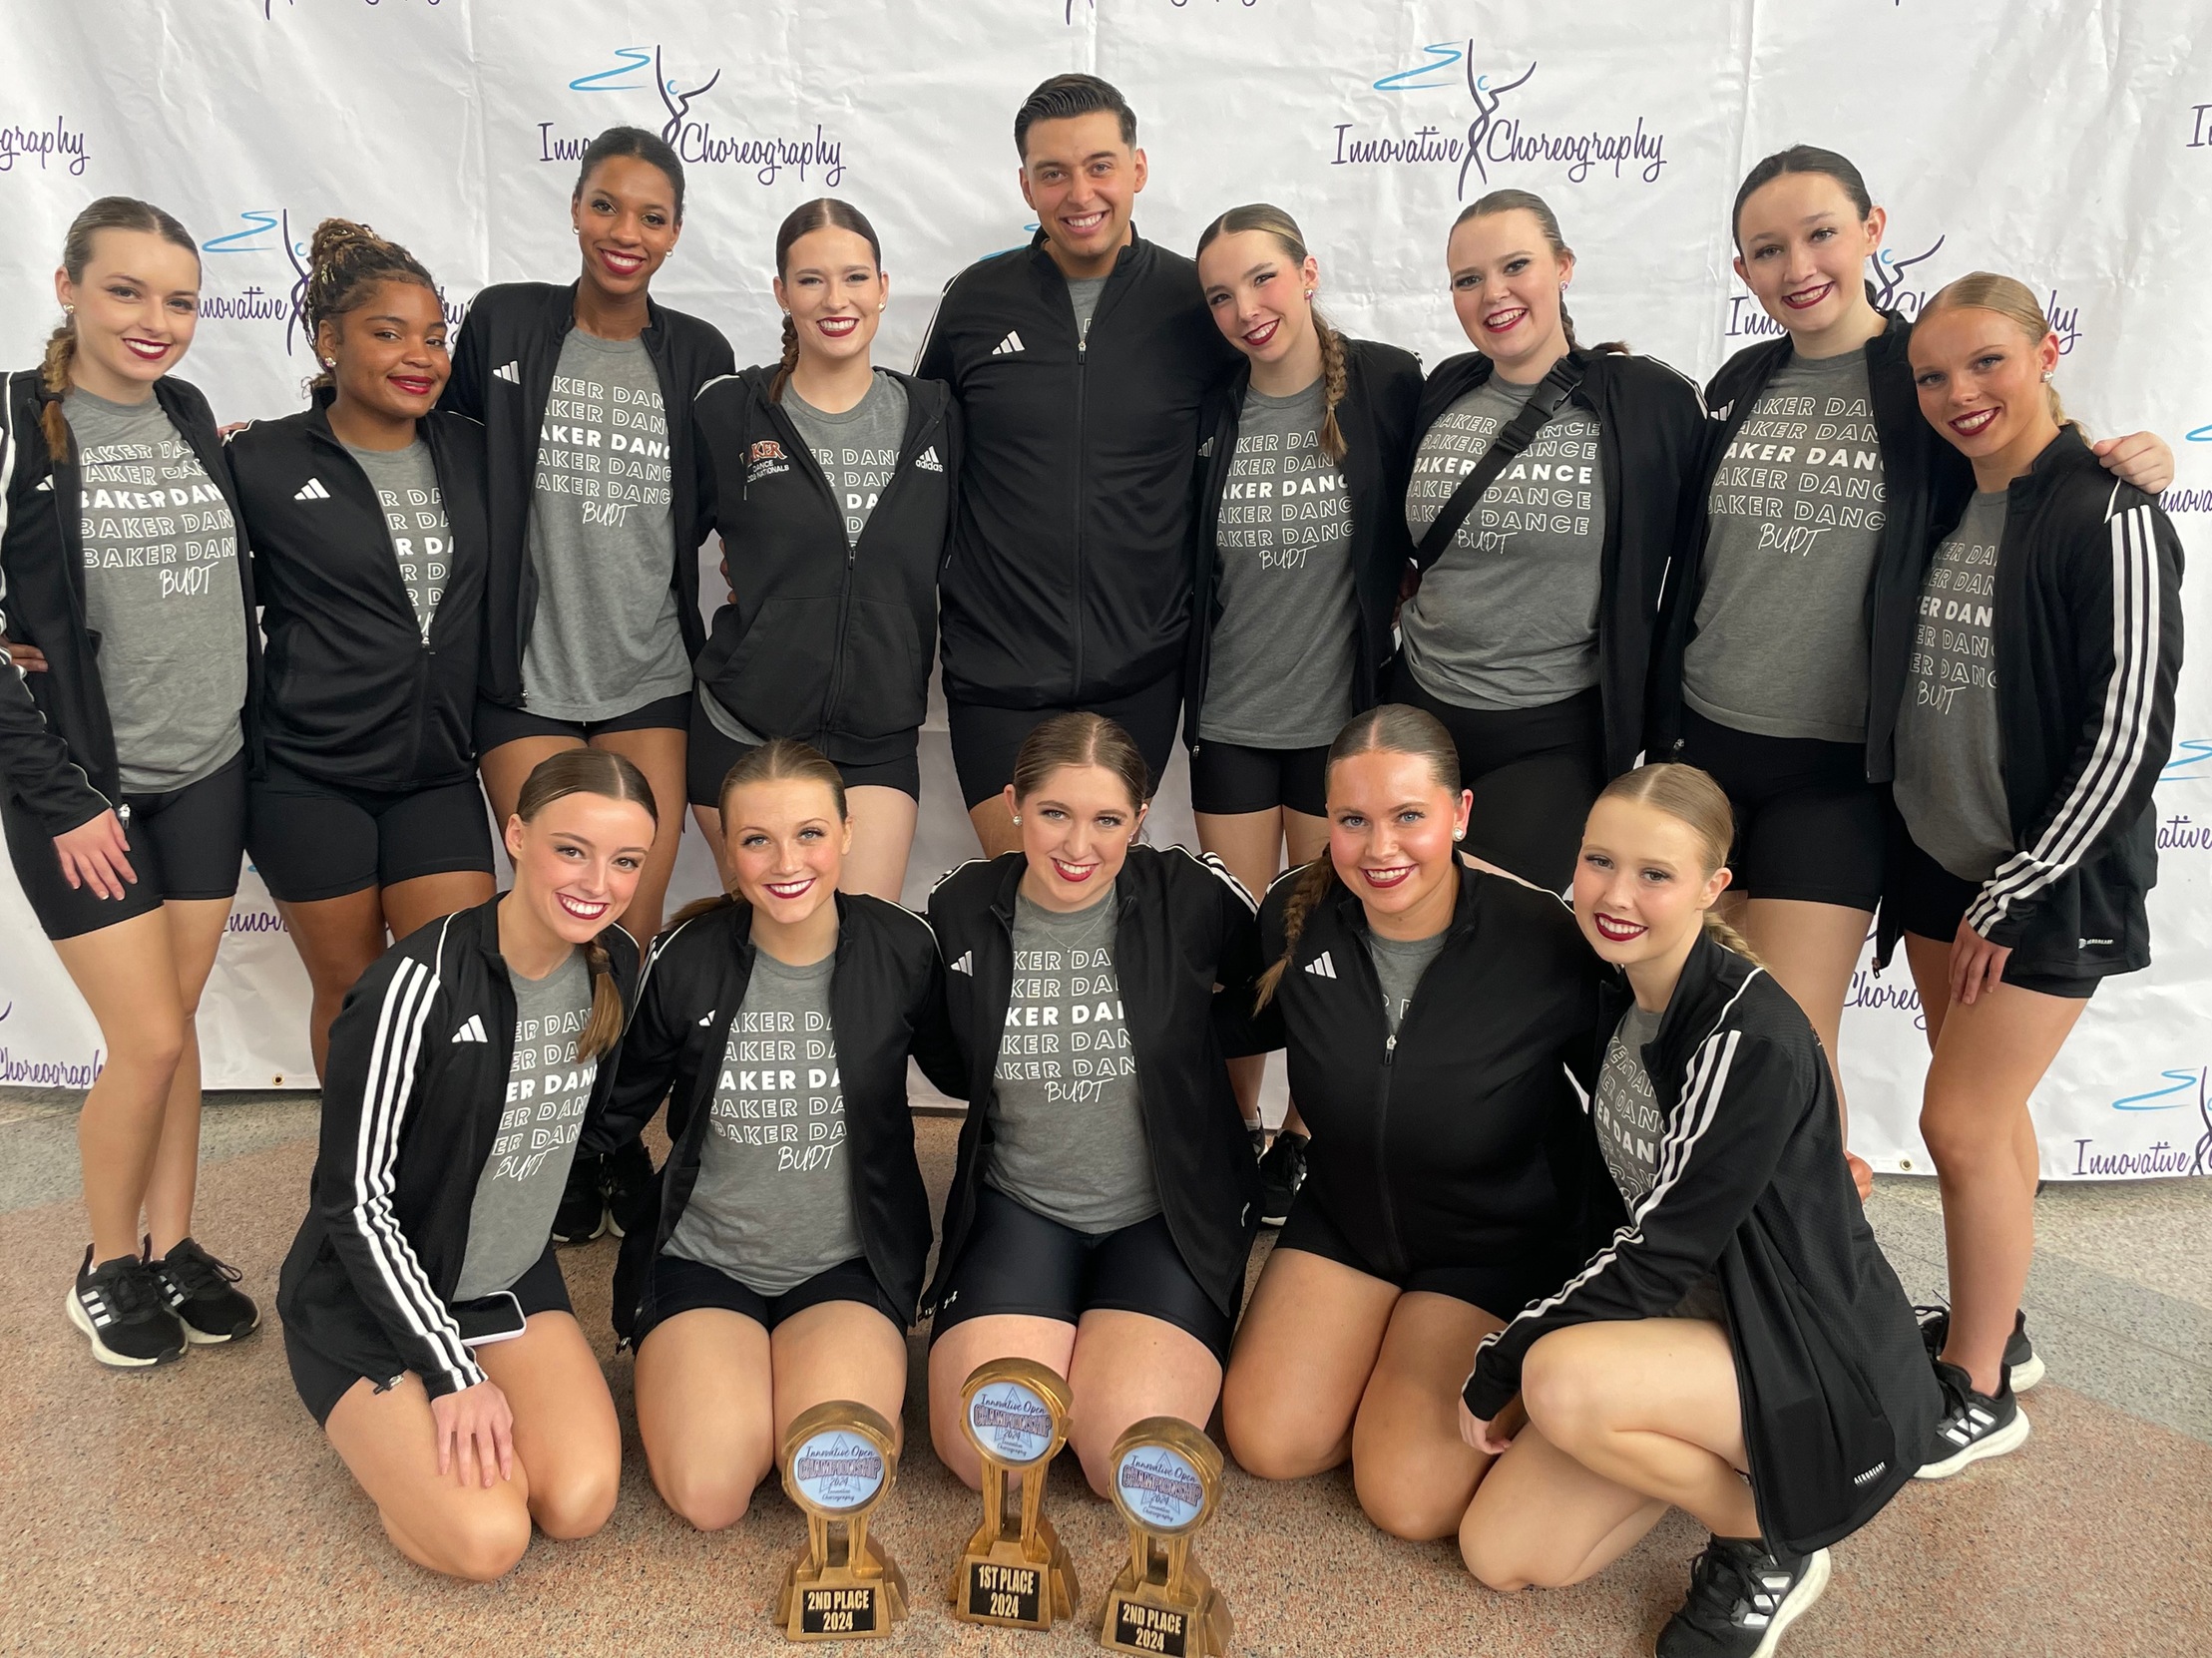 Baker Dance Wraps Up Regular-Season Competition with Innovative Open Championship